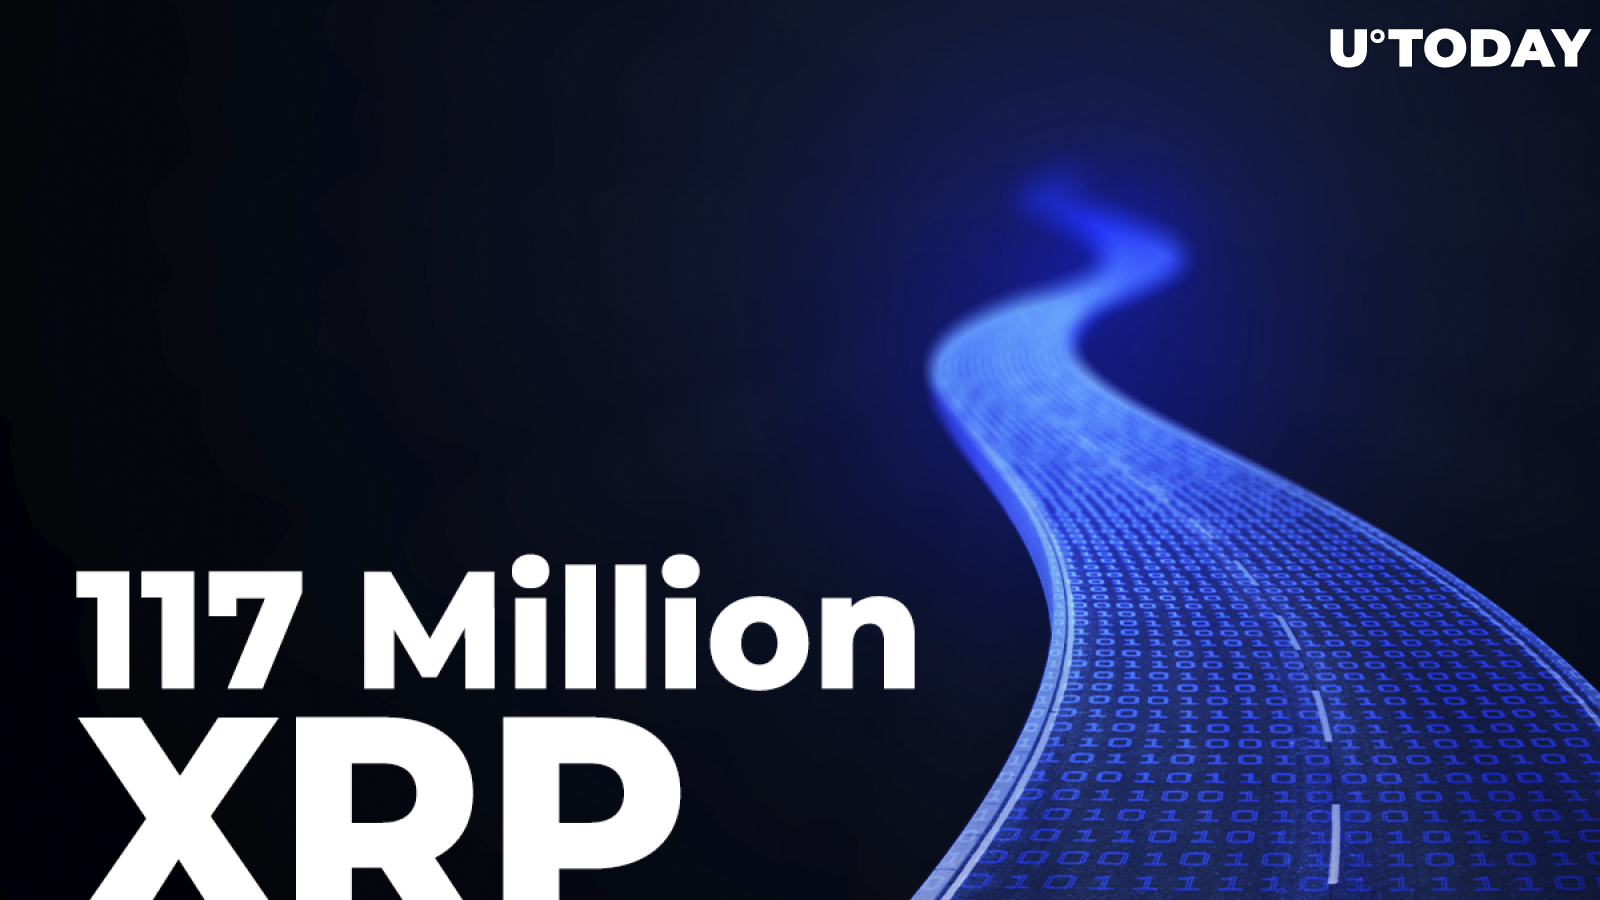 117 Million XRP Transferred by Several Largest Exchanges